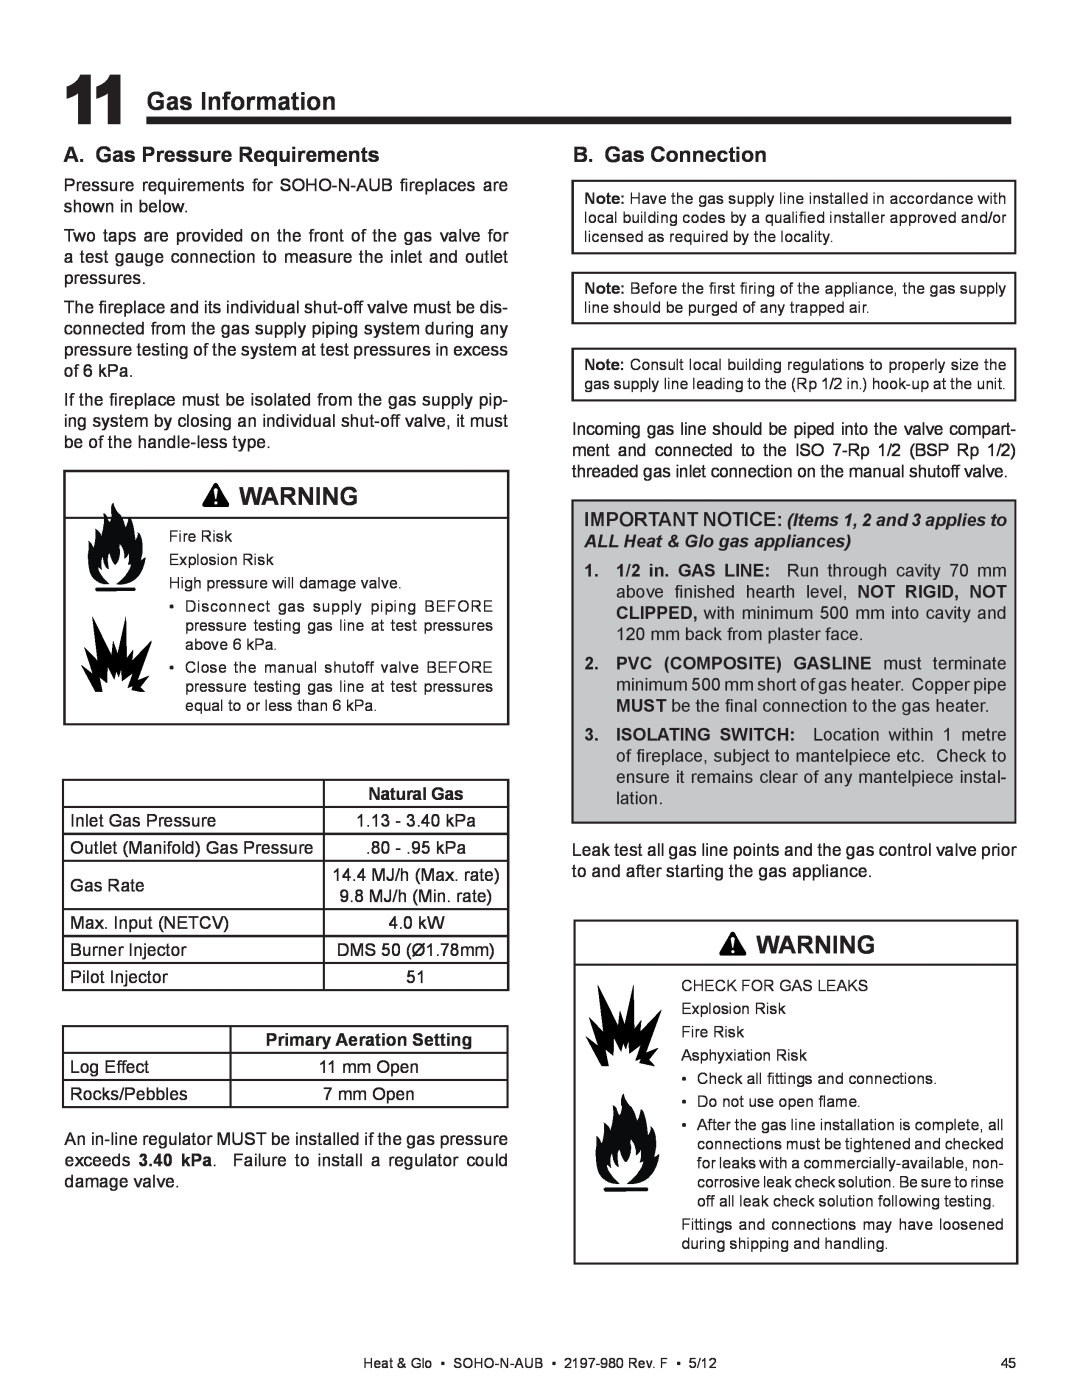 Heat & Glo LifeStyle 2197-980 owner manual Gas Information, A. Gas Pressure Requirements, B. Gas Connection, Natural Gas 